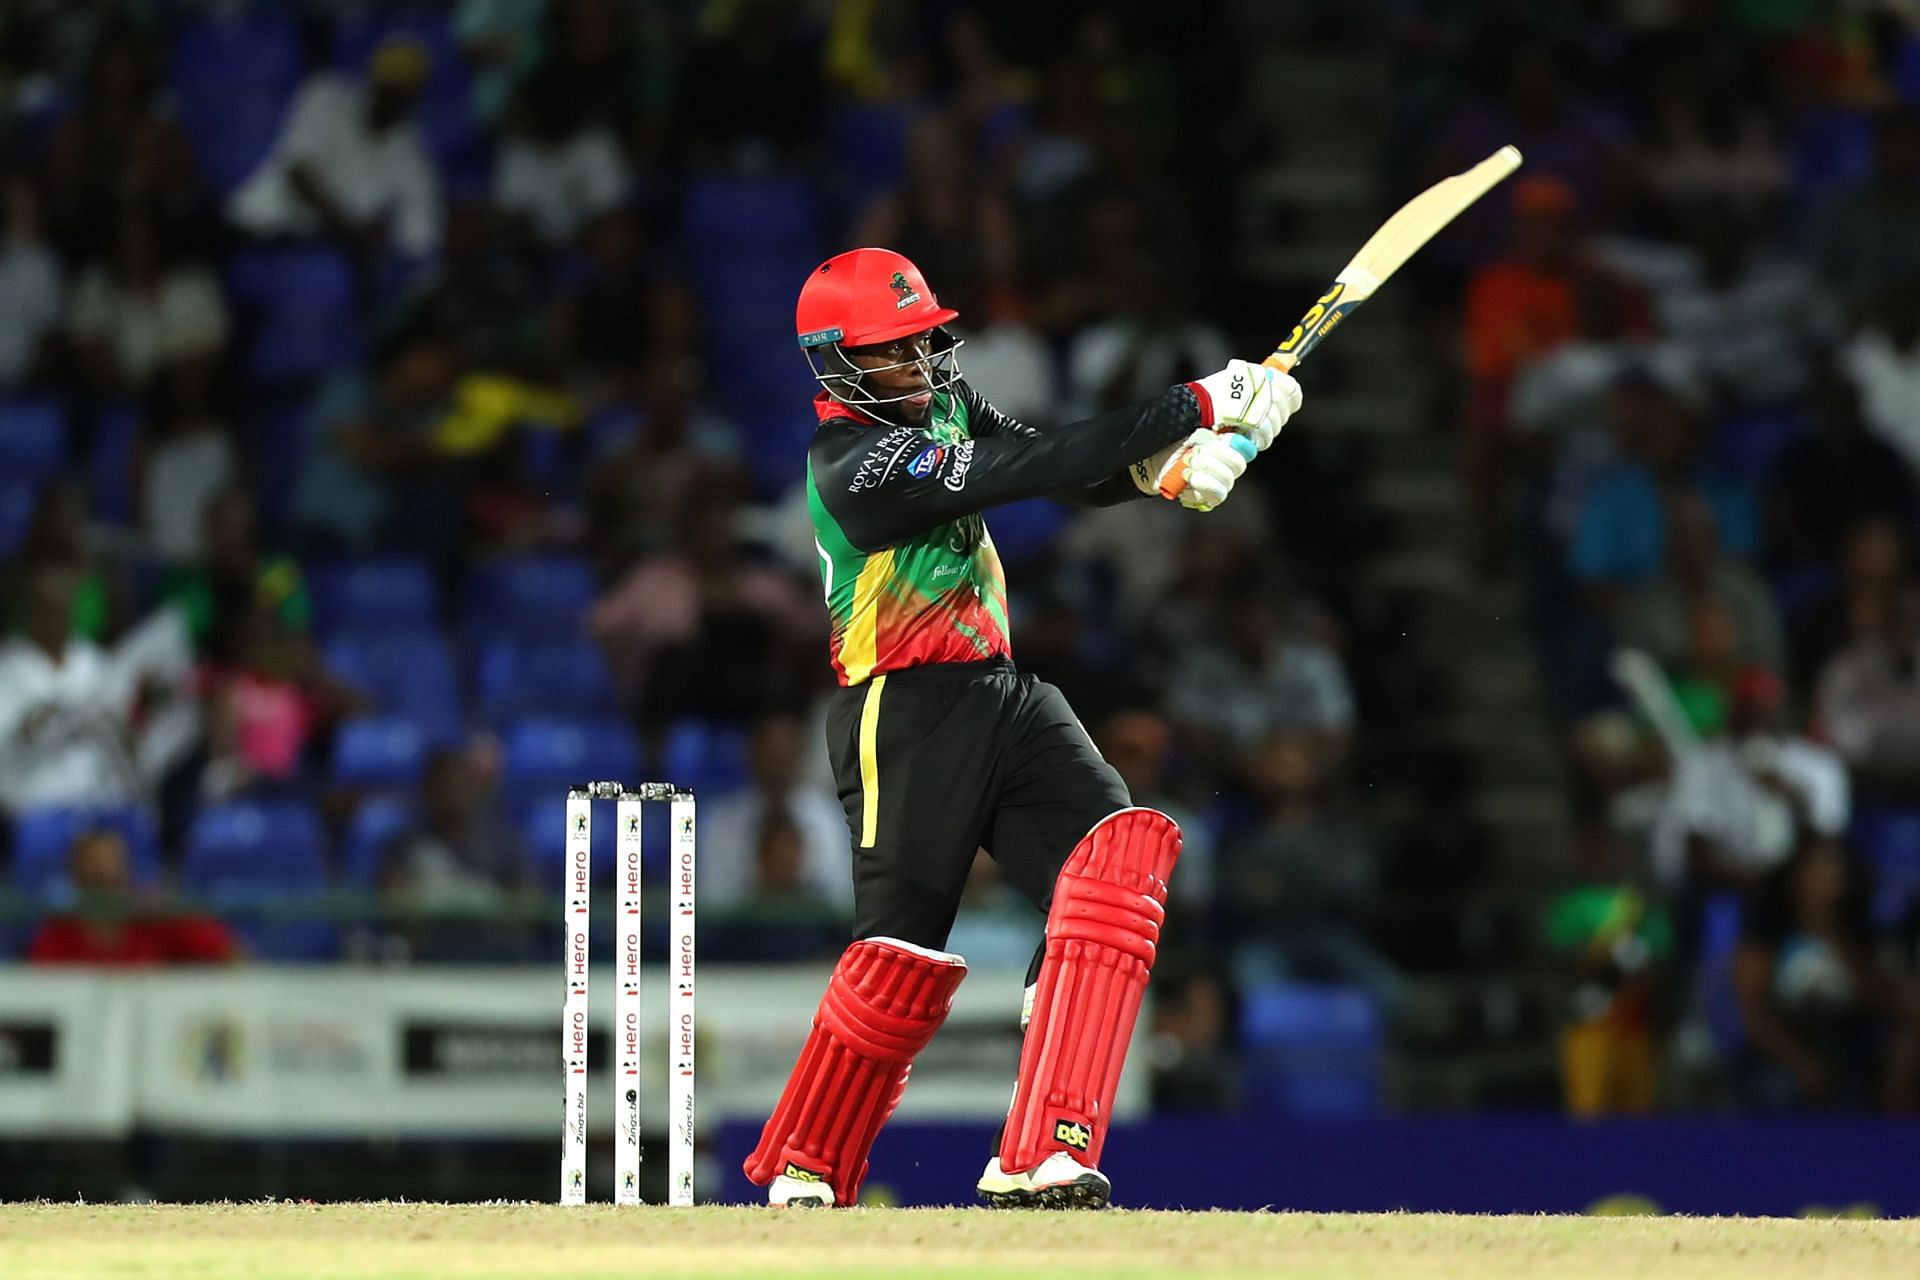 Fabian Allen can be a good acquisition for Rajasthan Royals